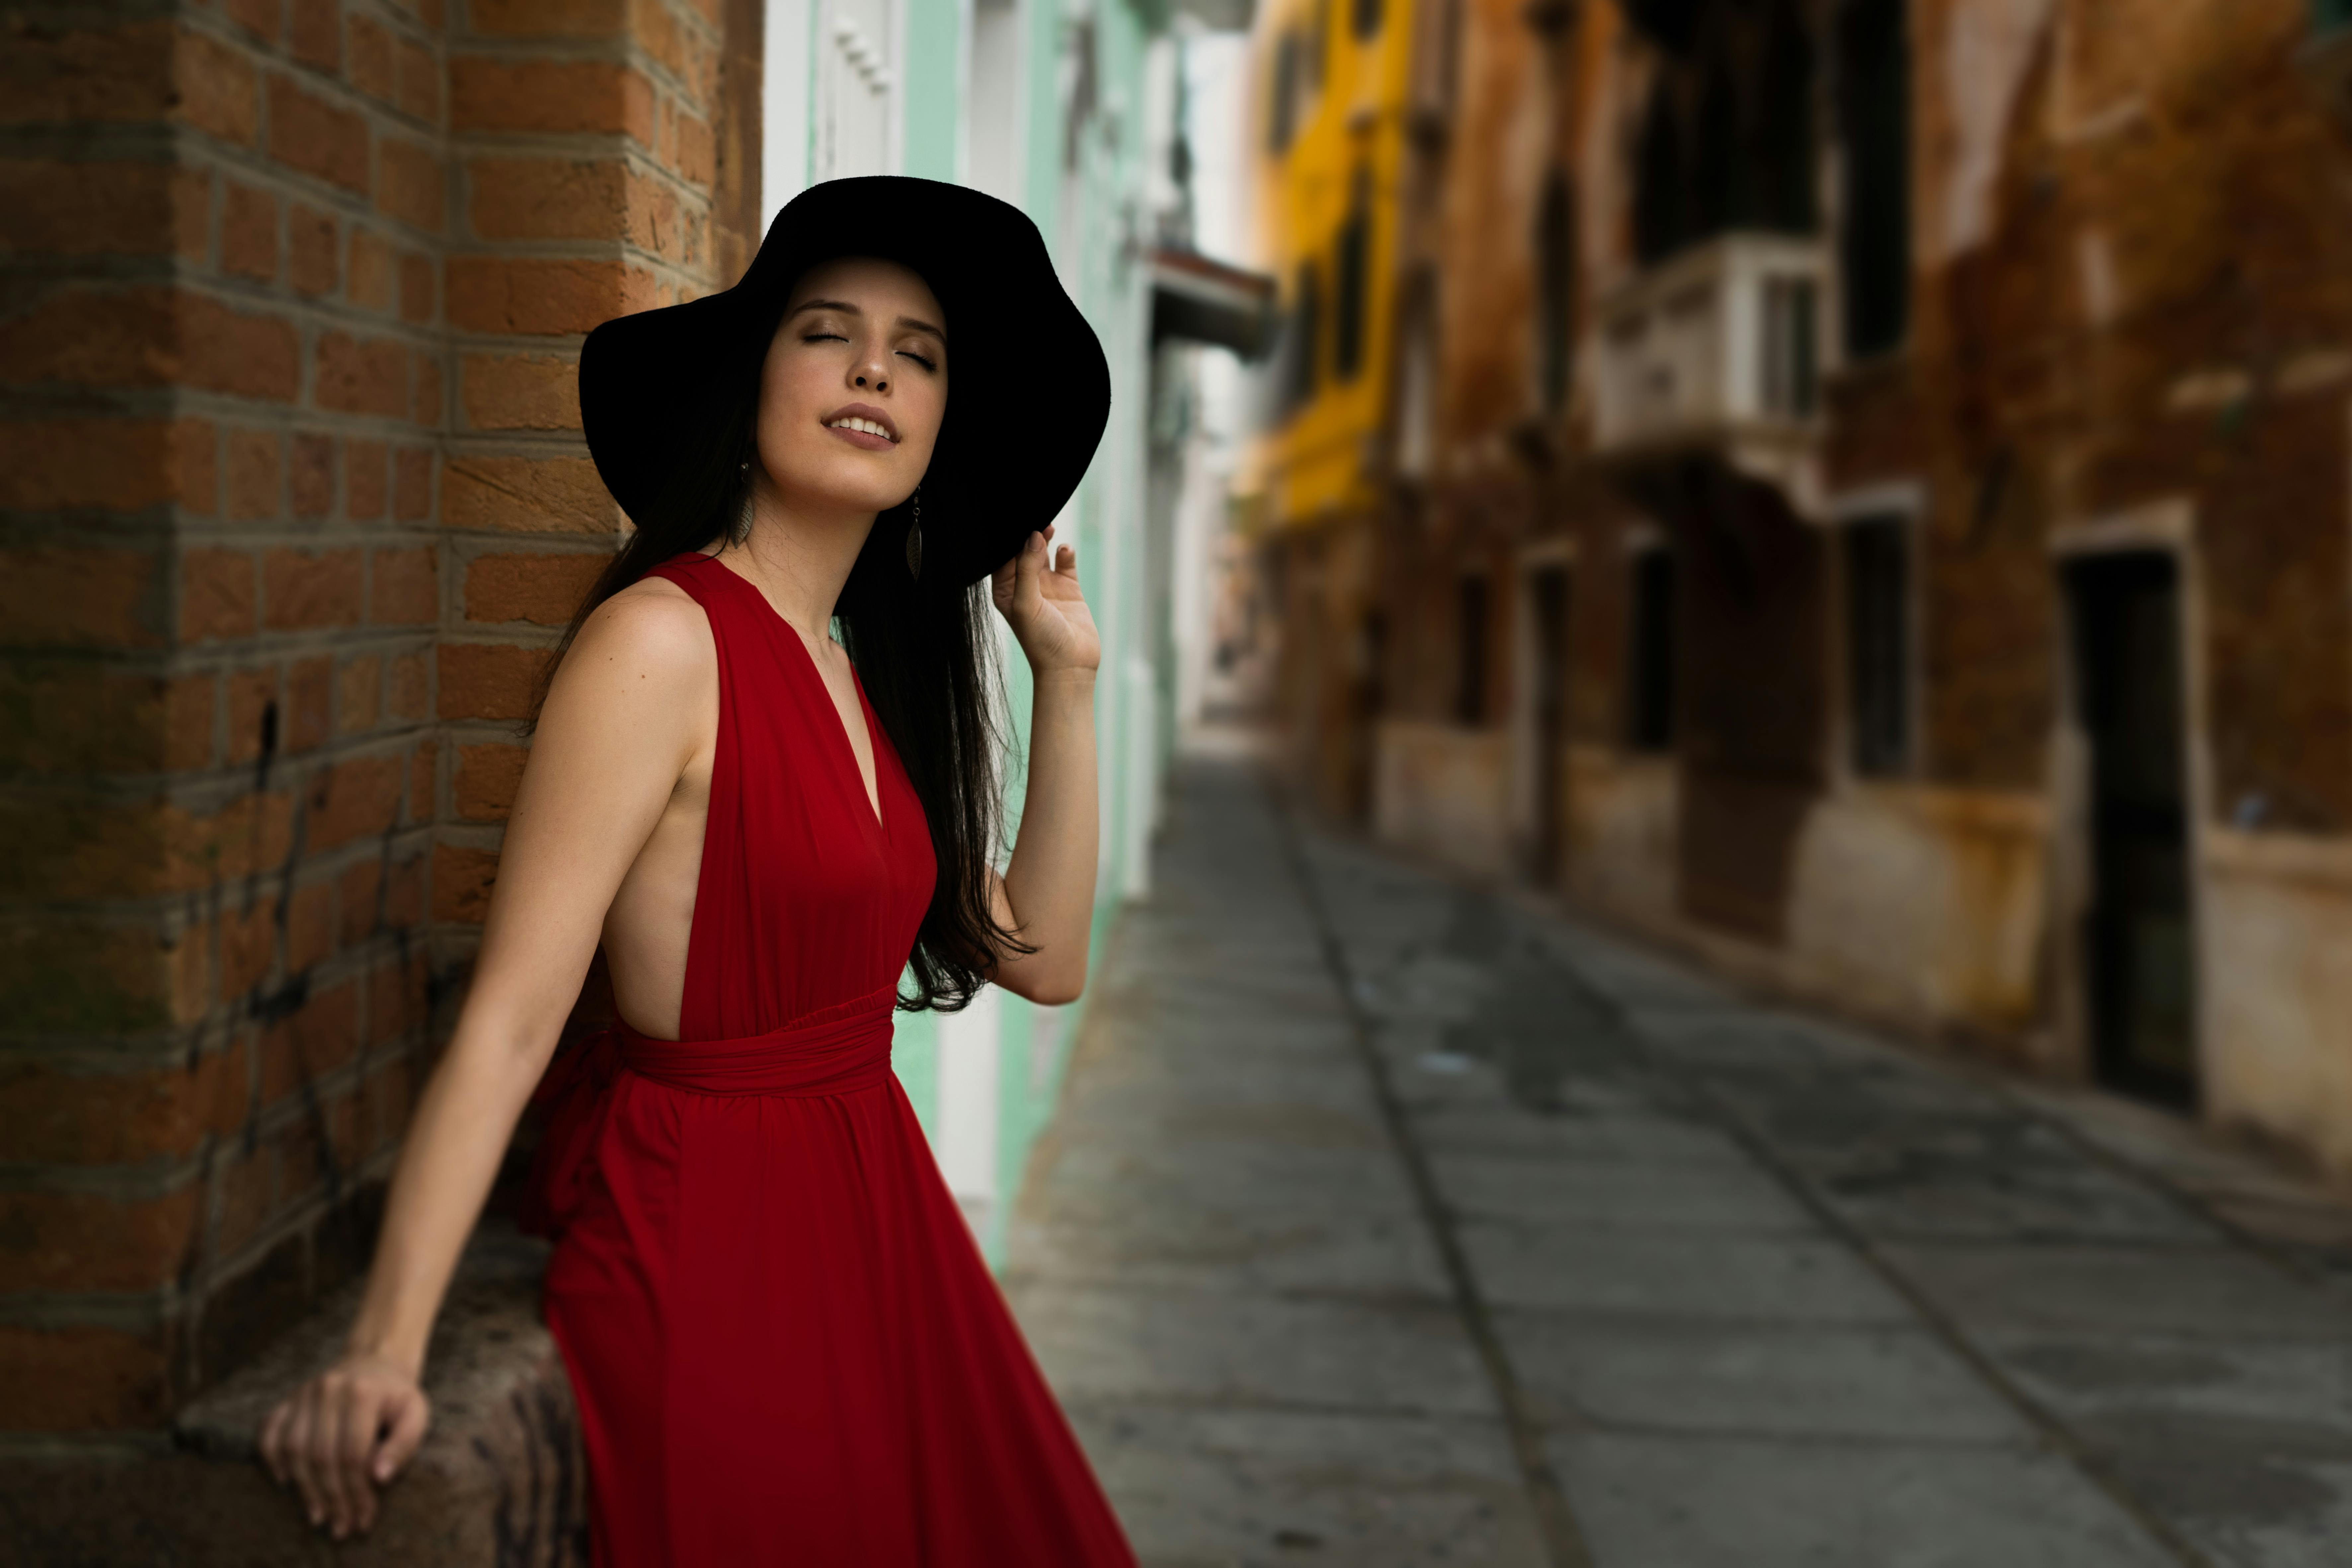 Photo of Woman With Her Eyes Closed Wearing a Red Dress and Black Hat Leaning on Red Brick Wall in Alley